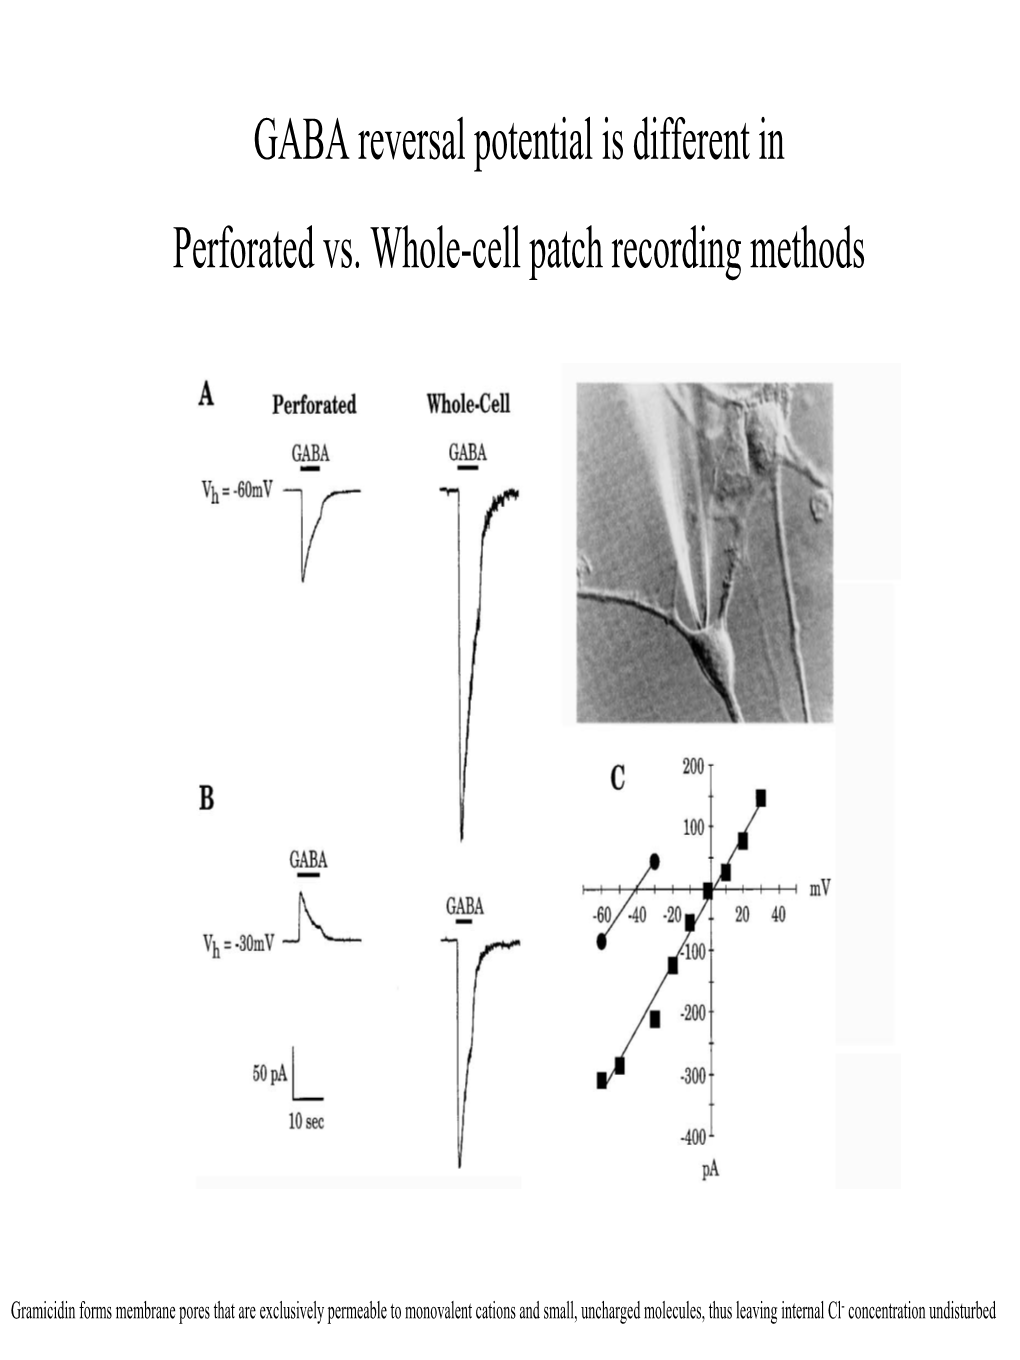 GABA Reversal Potential Is Different in Perforated Vs. Whole-Cell Patch Recording Methods